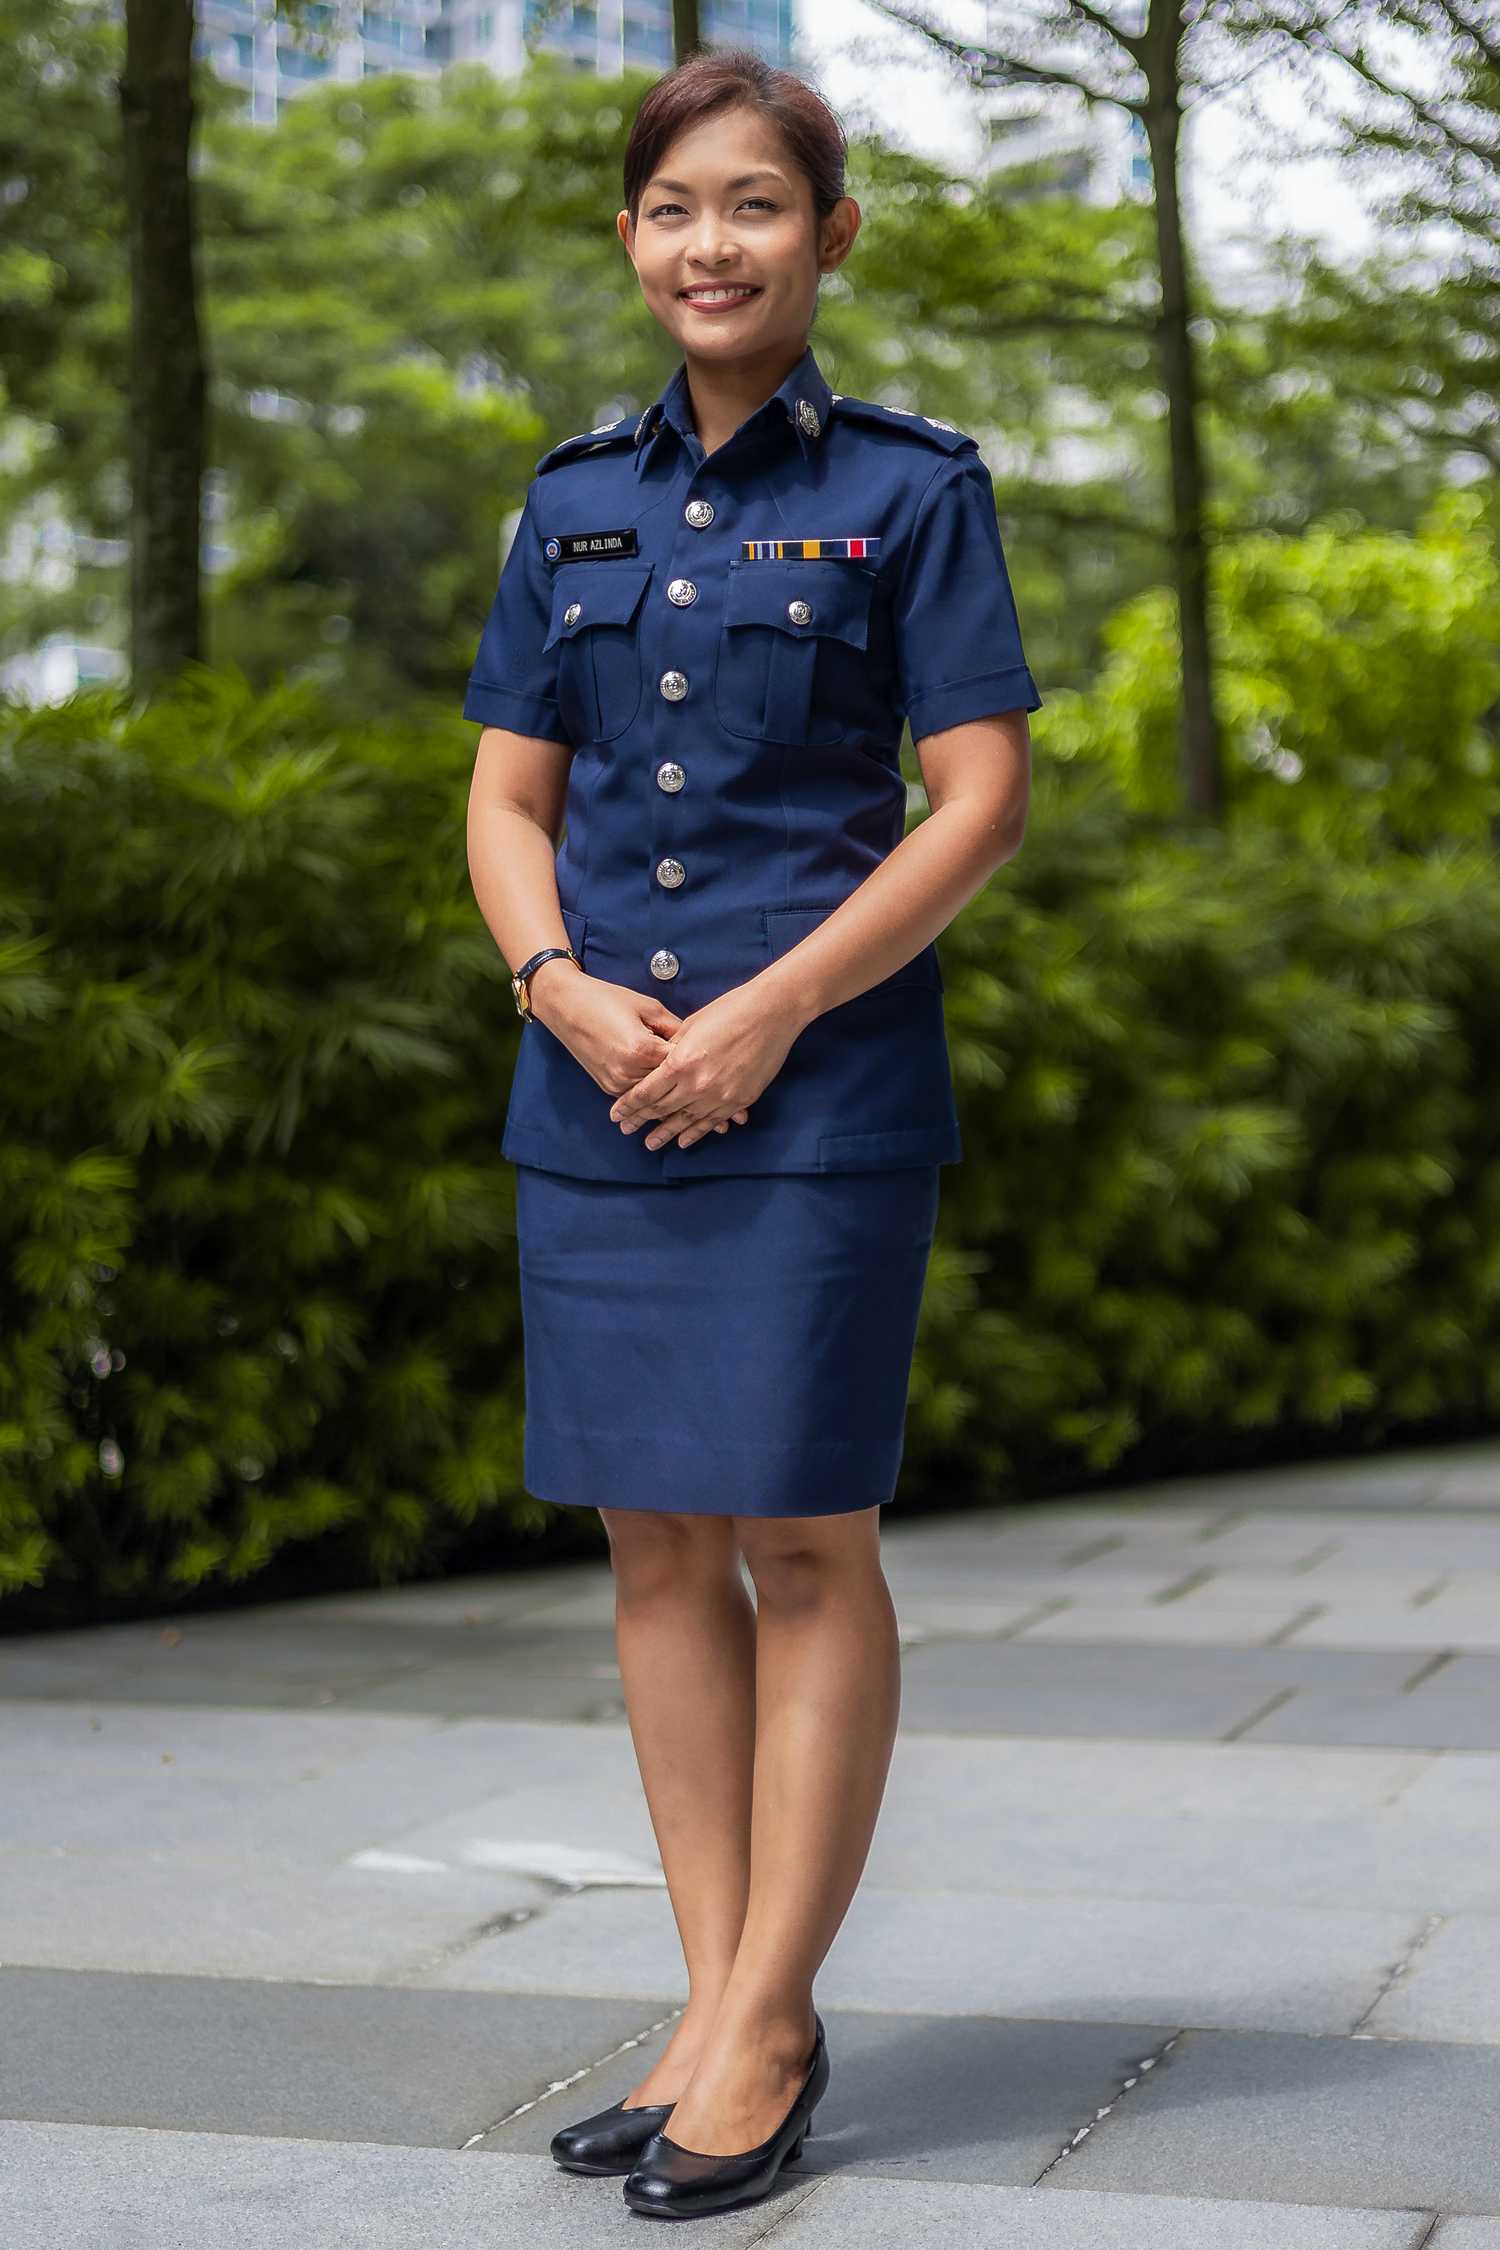 A profile shot of Deputy Superintendent of Police Azlinda Aziz in uniform, smiling and standing in front of the camera.